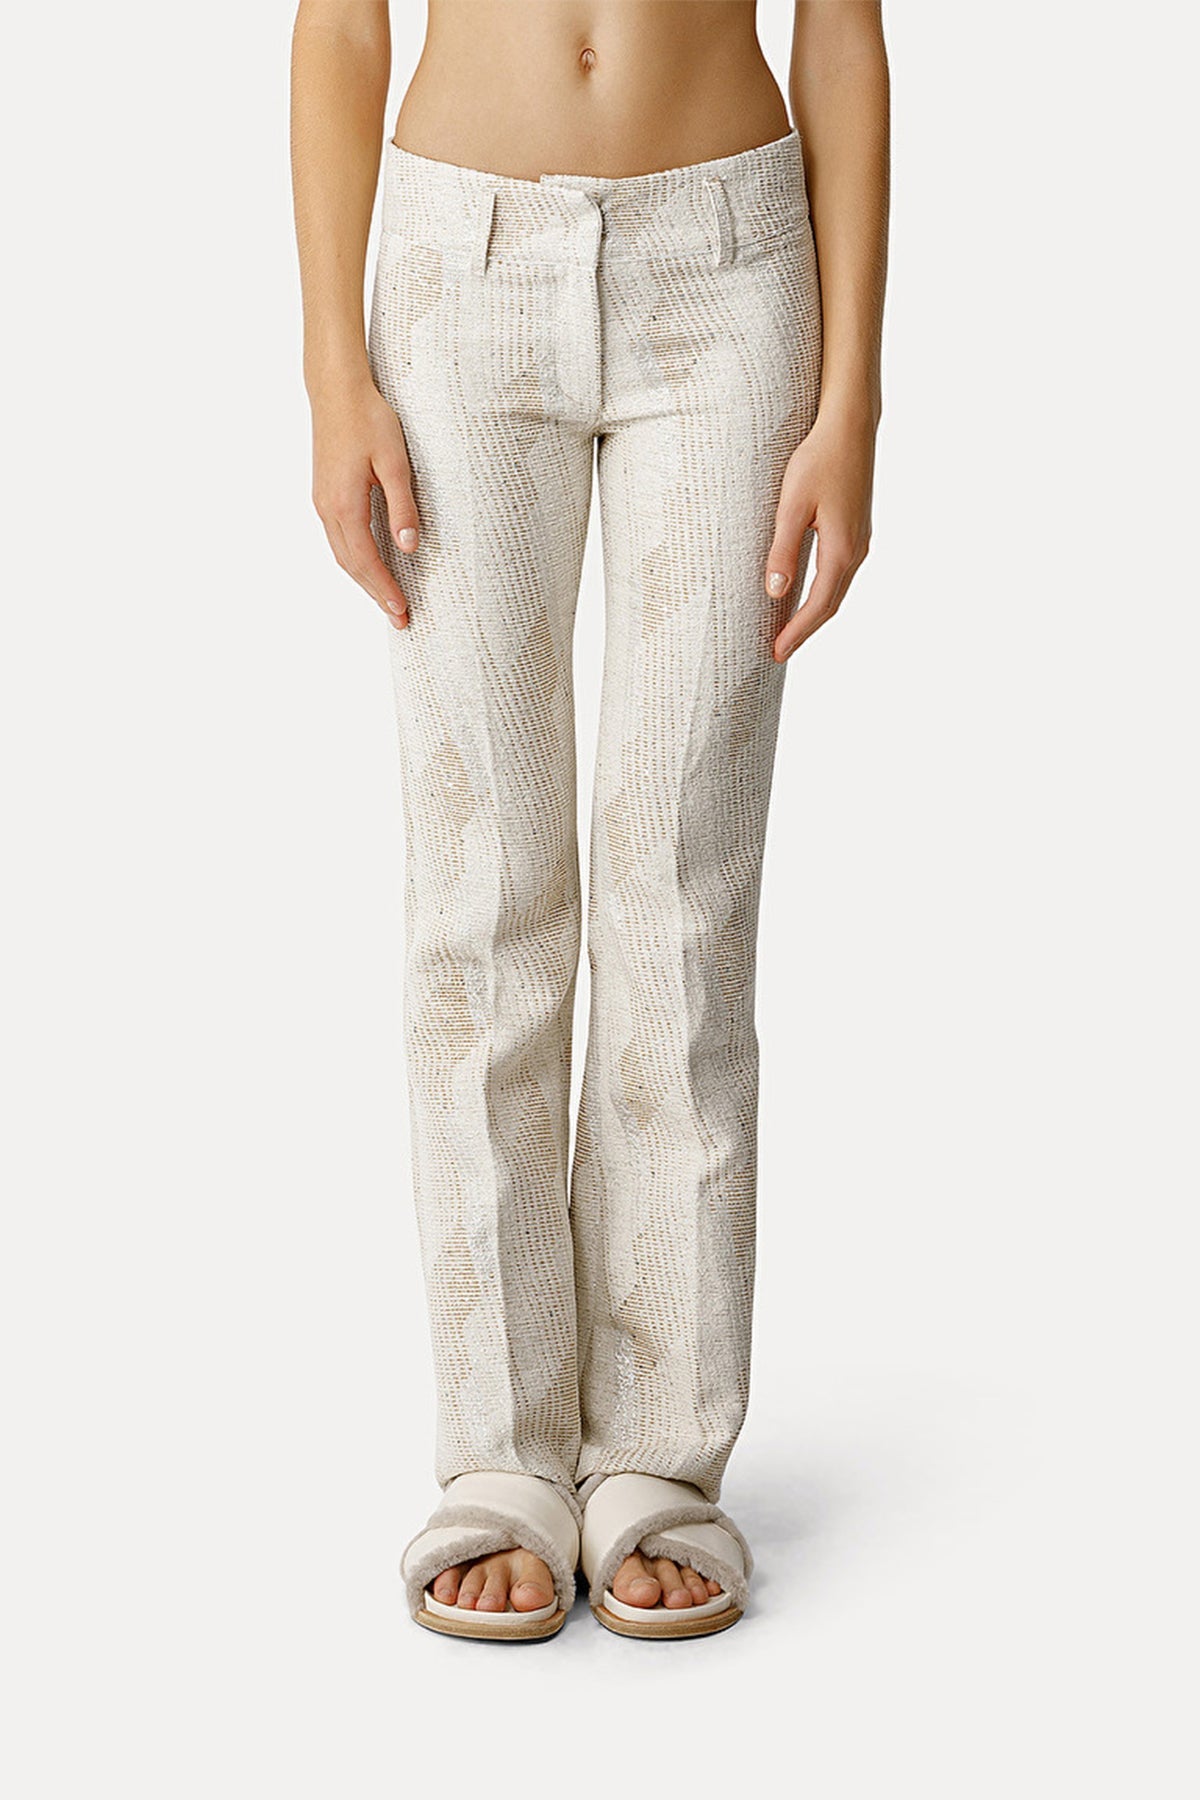 “Endless Skies” Jacquard Trousers in Ivory - shop-olivia.com